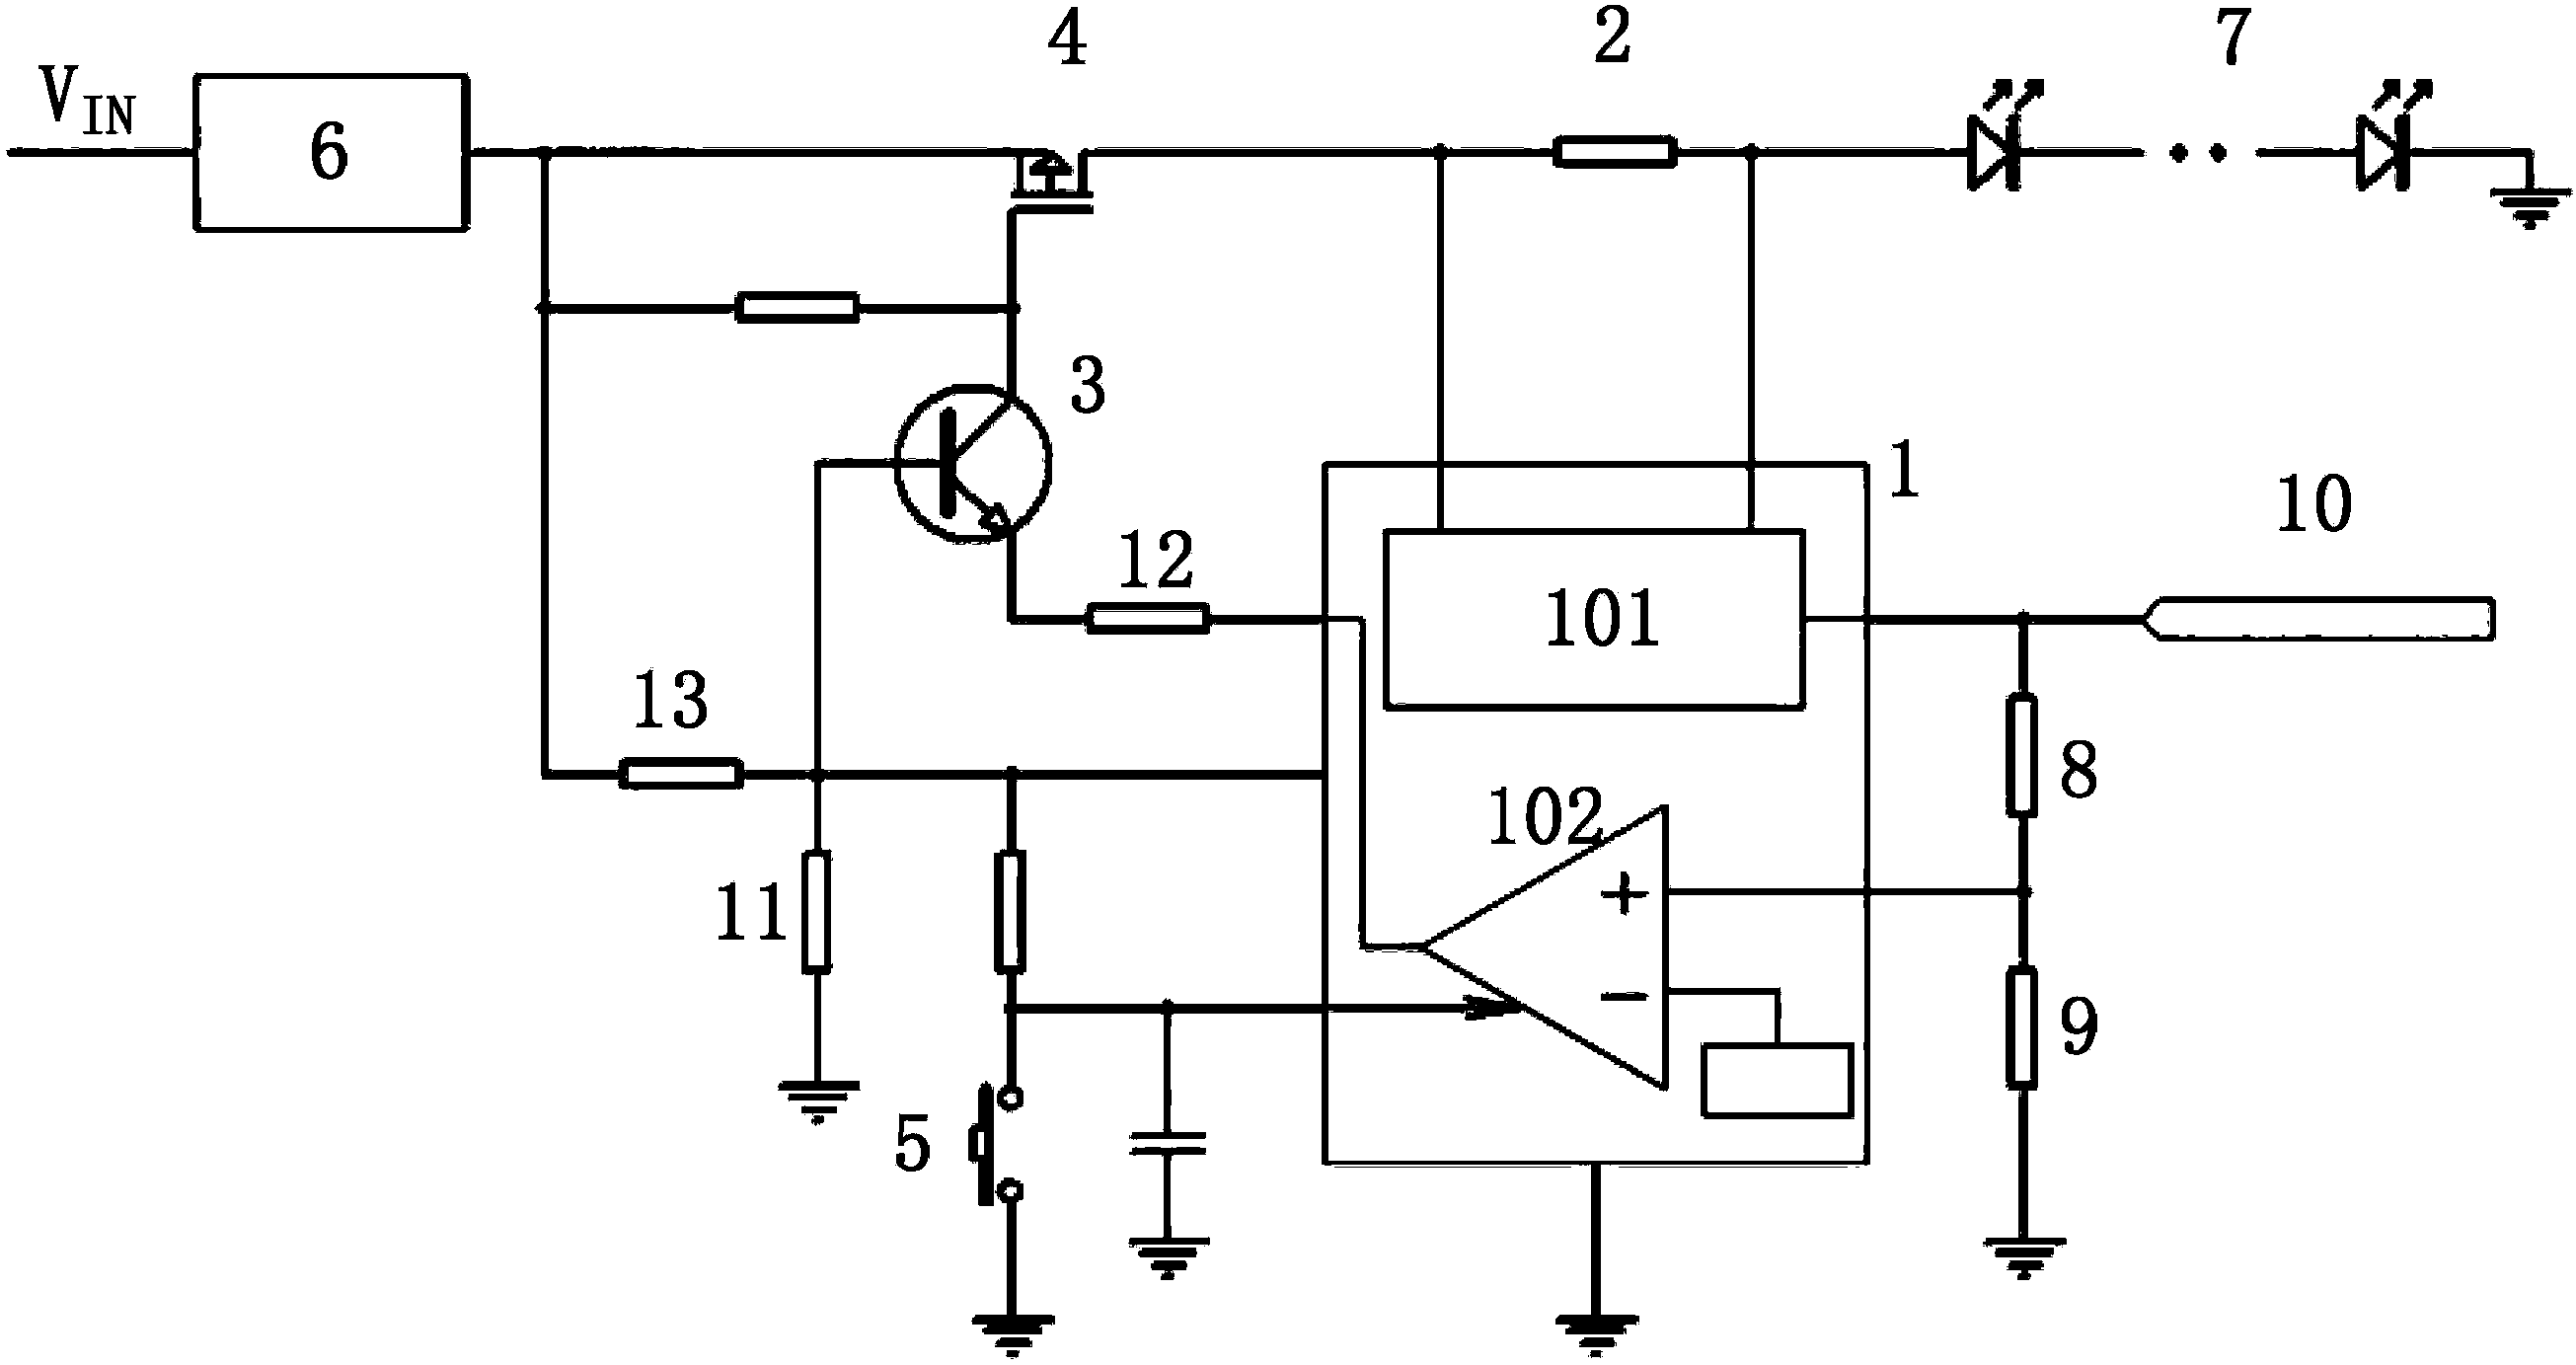 LED (Light-Emitting Diode) lamp and electronic breaker thereof